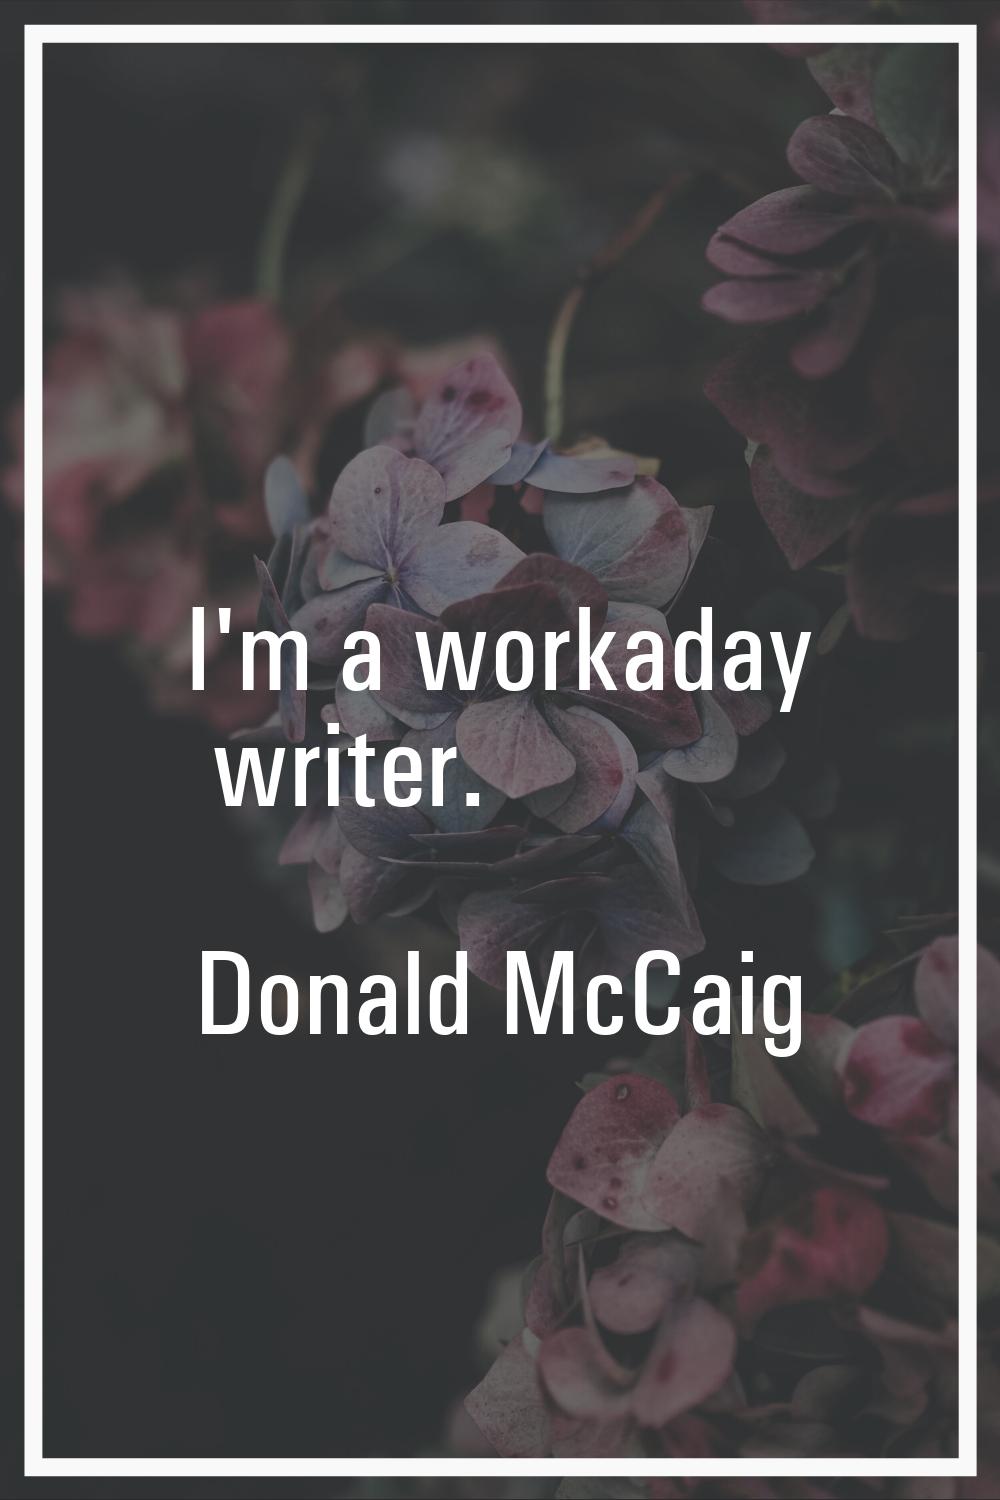 I'm a workaday writer.